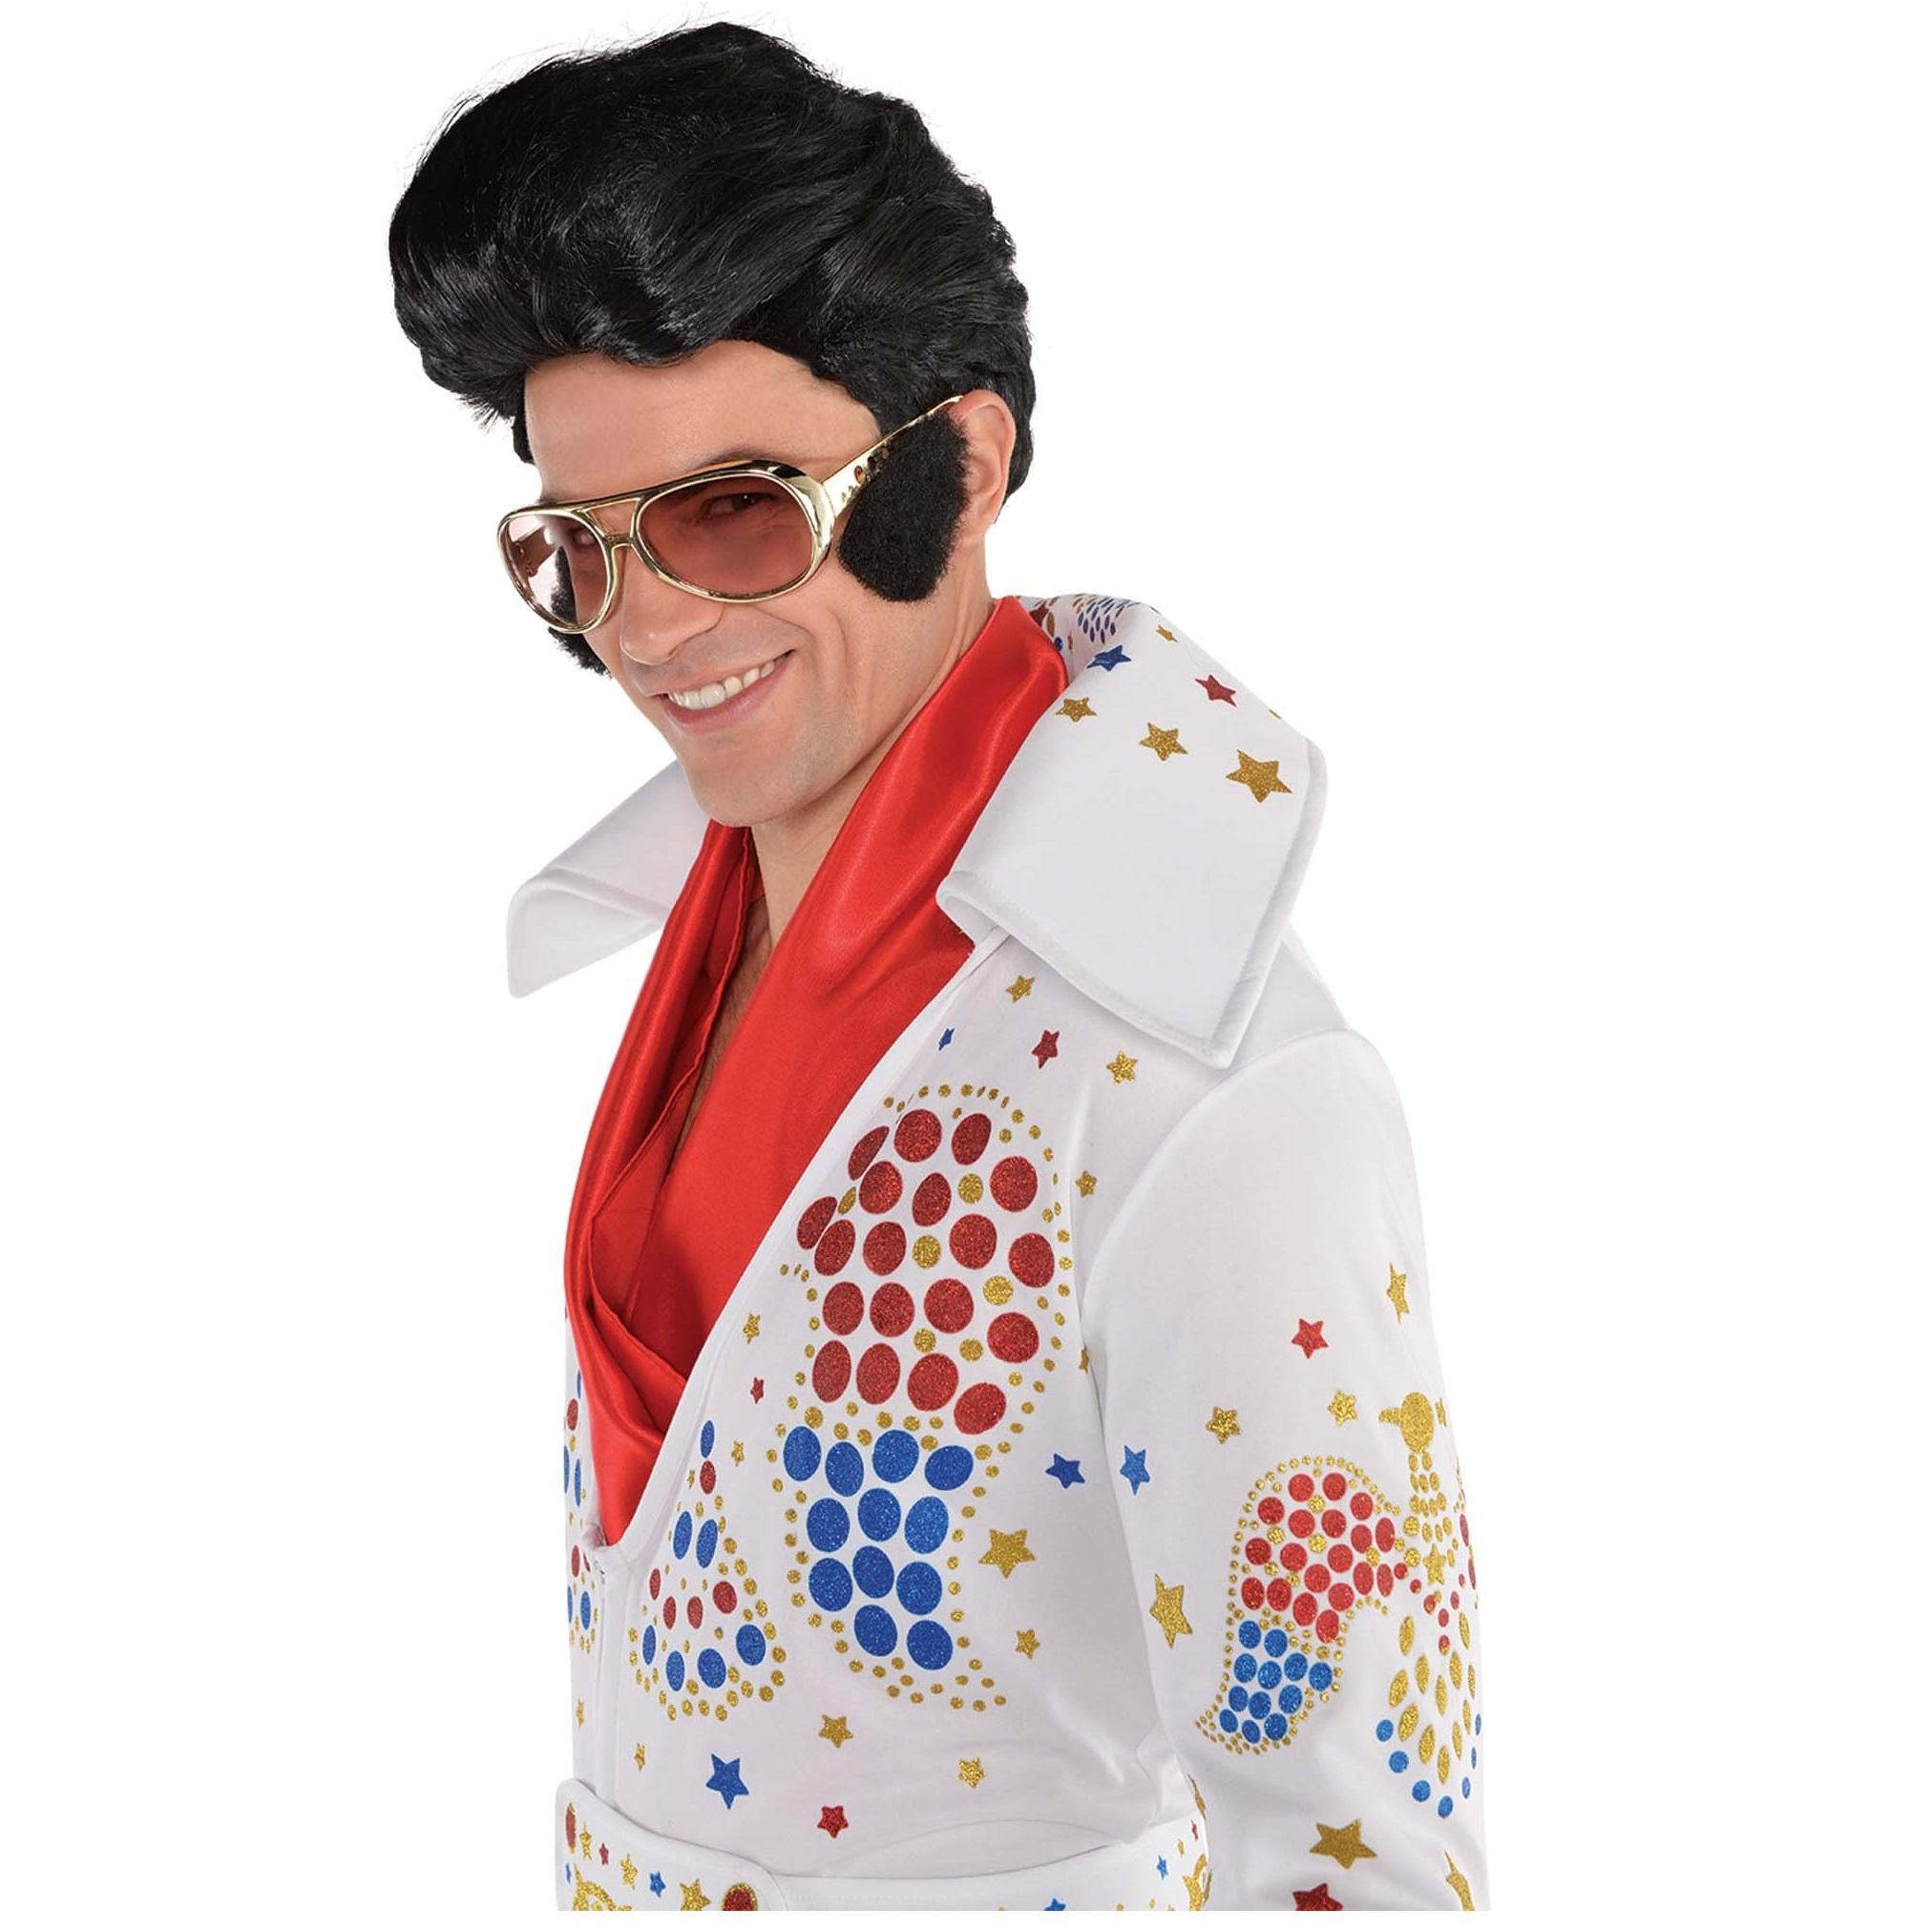 Adult Black Sideburns Costumes & Apparel - Party Centre